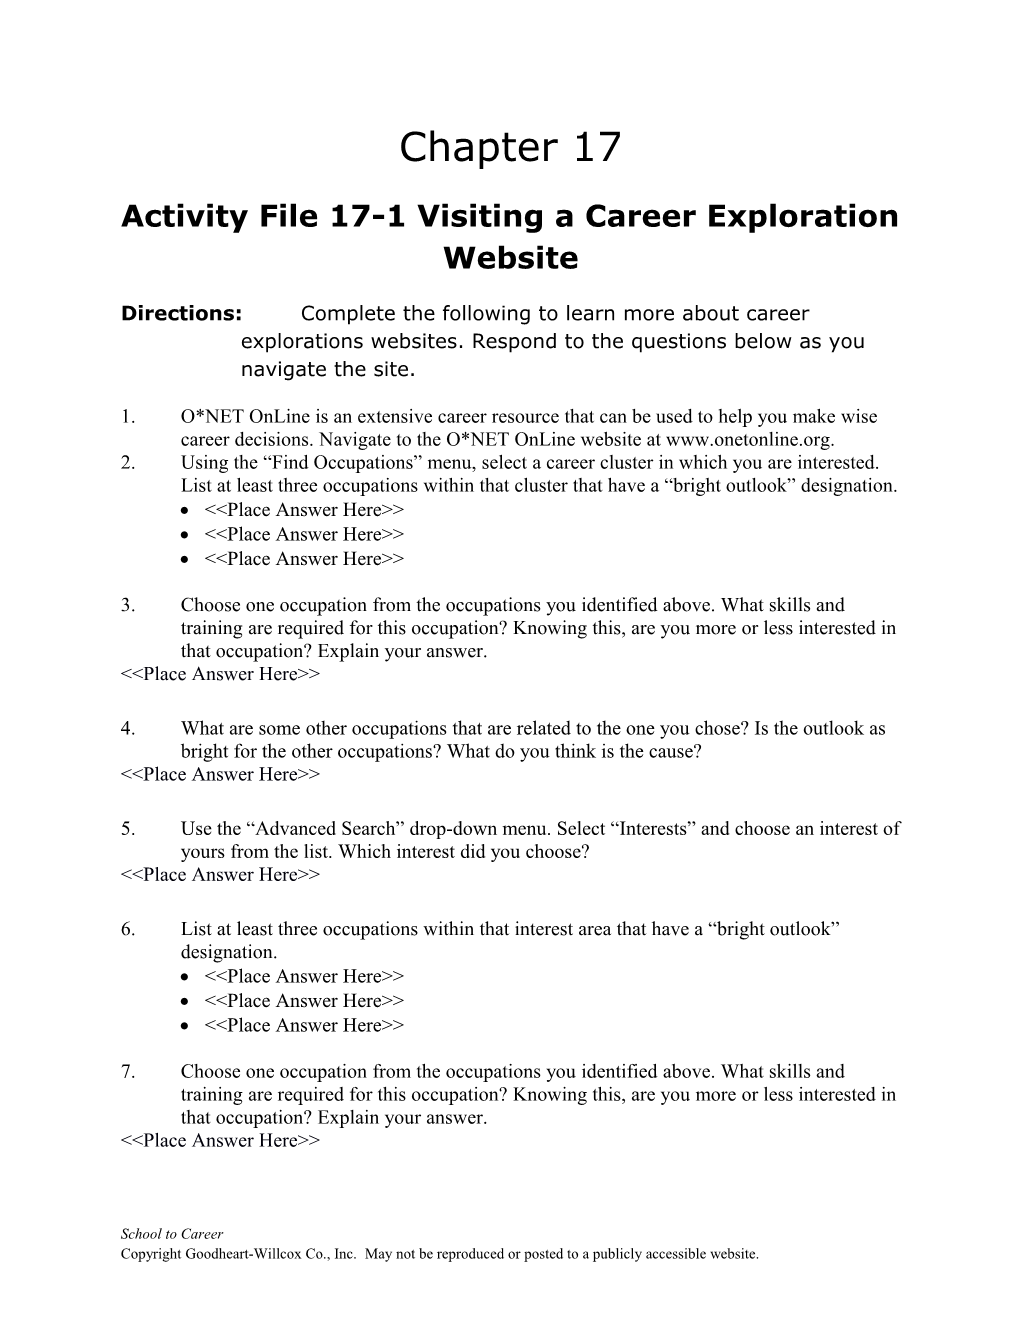 Activity File 17-1 Visiting a Career Exploration Website